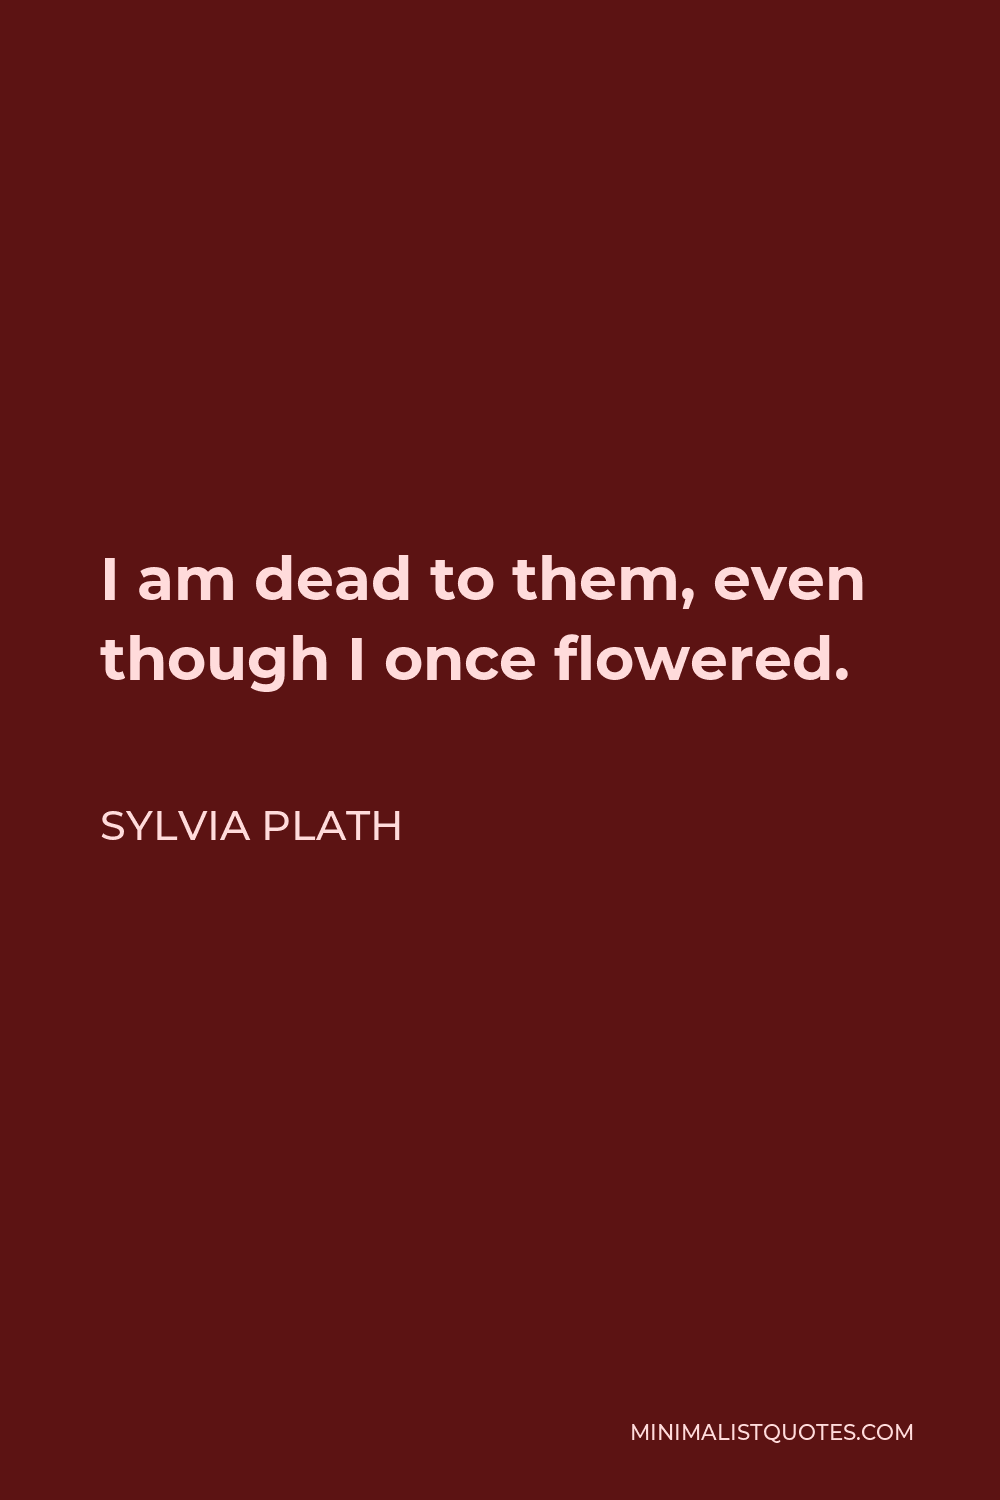 Sylvia Plath Quote - I am dead to them, even though I once flowered.